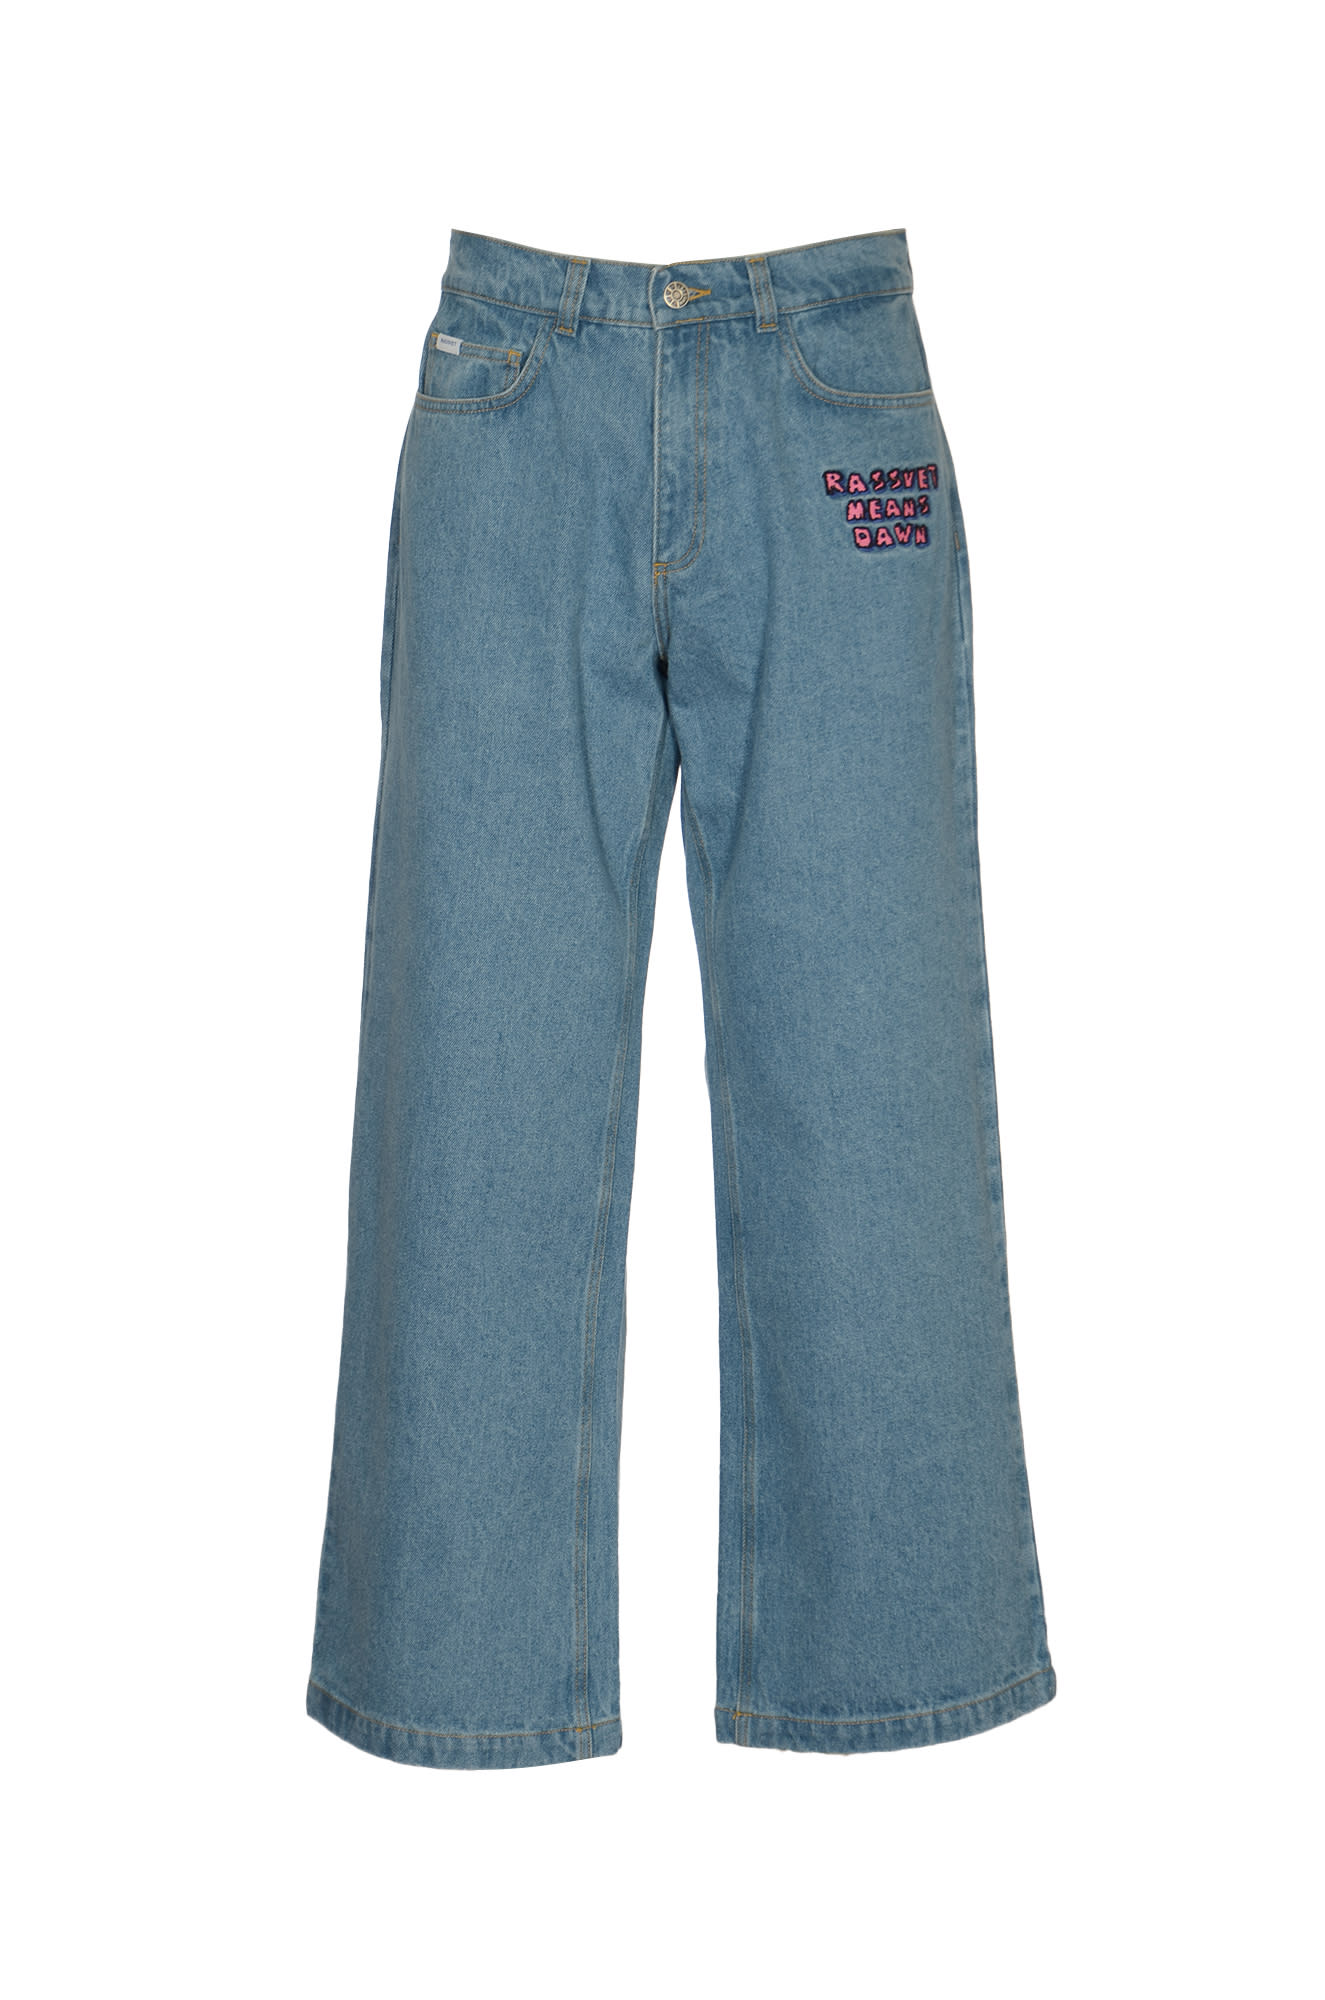 Embroidered 5 Pockets Jeans